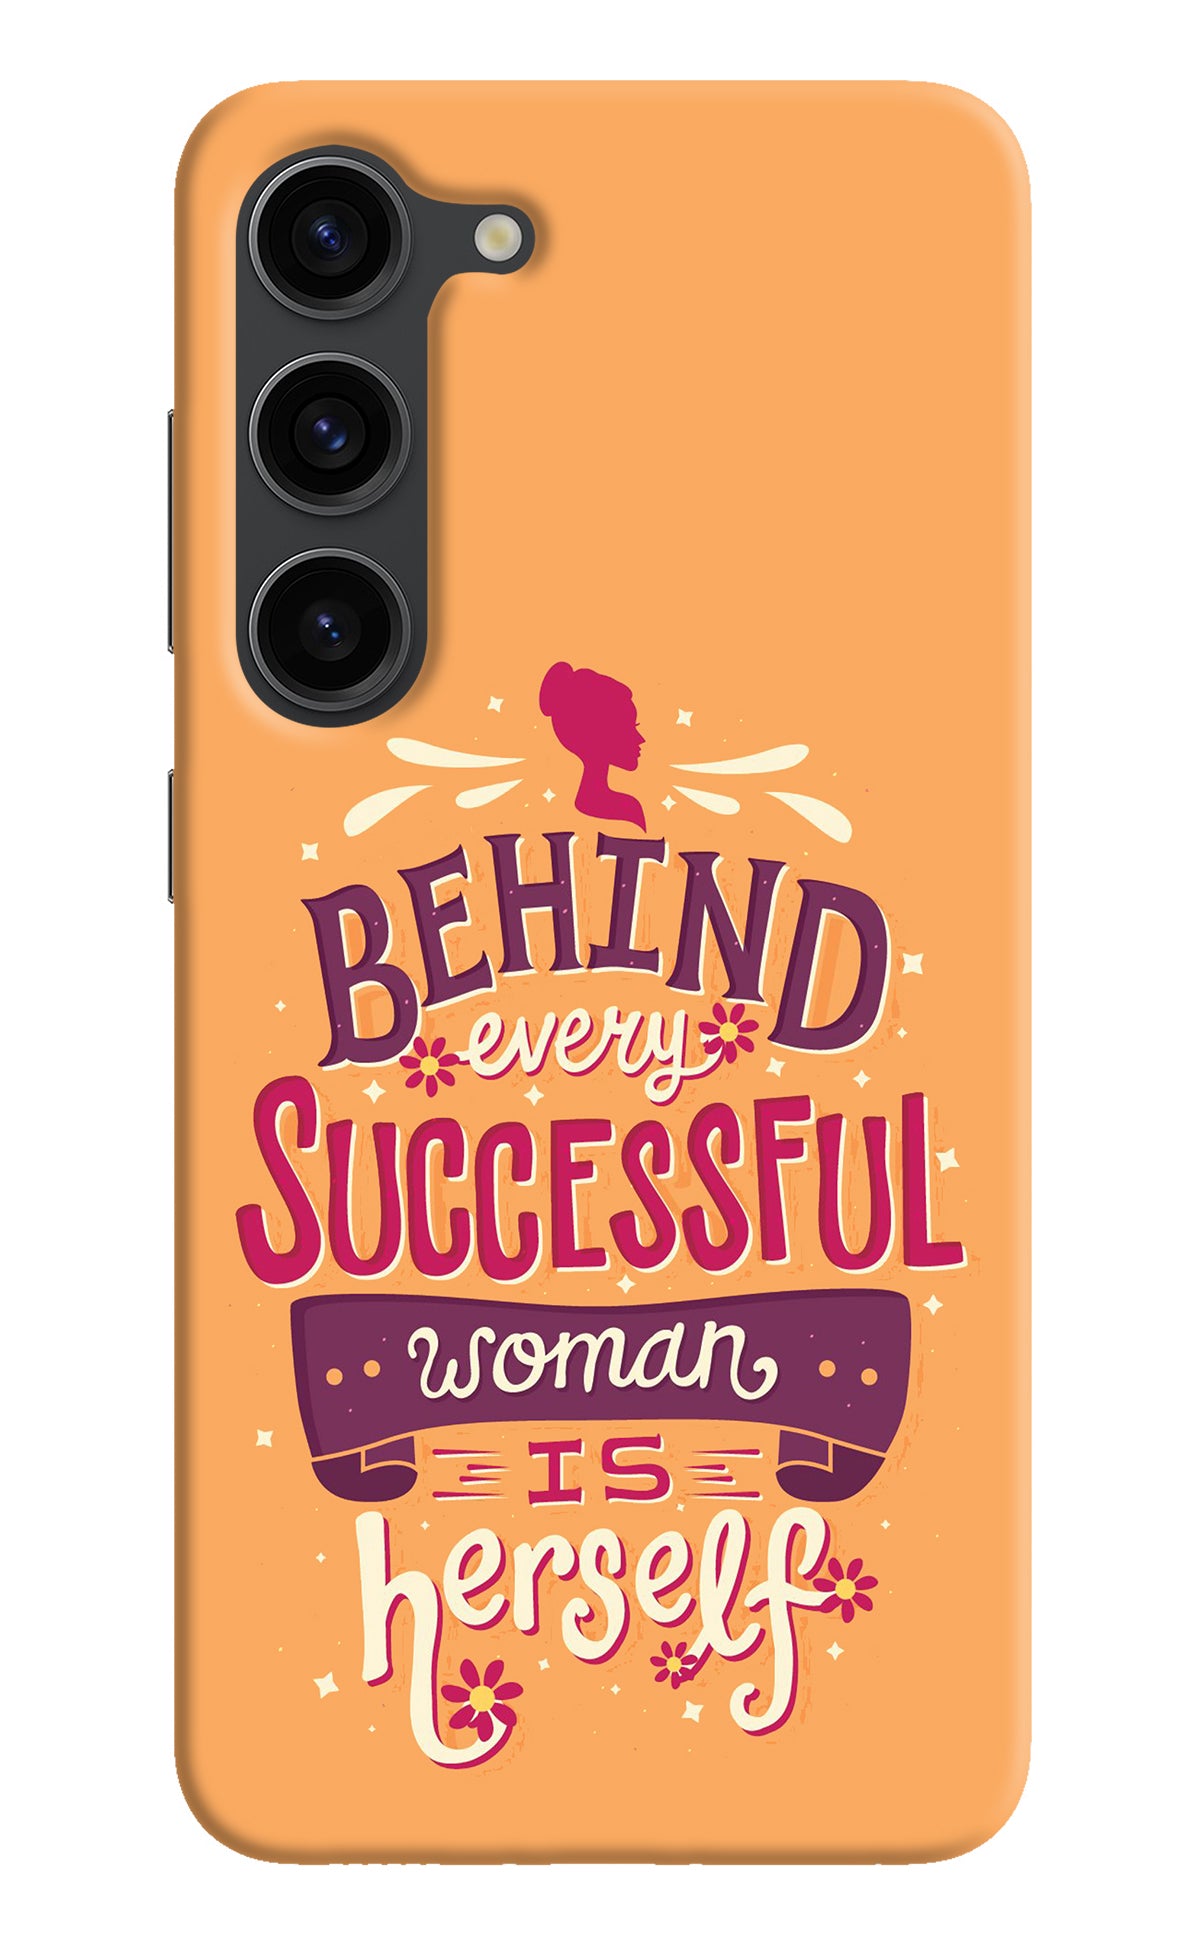 Behind Every Successful Woman There Is Herself Samsung S23 Plus Back Cover